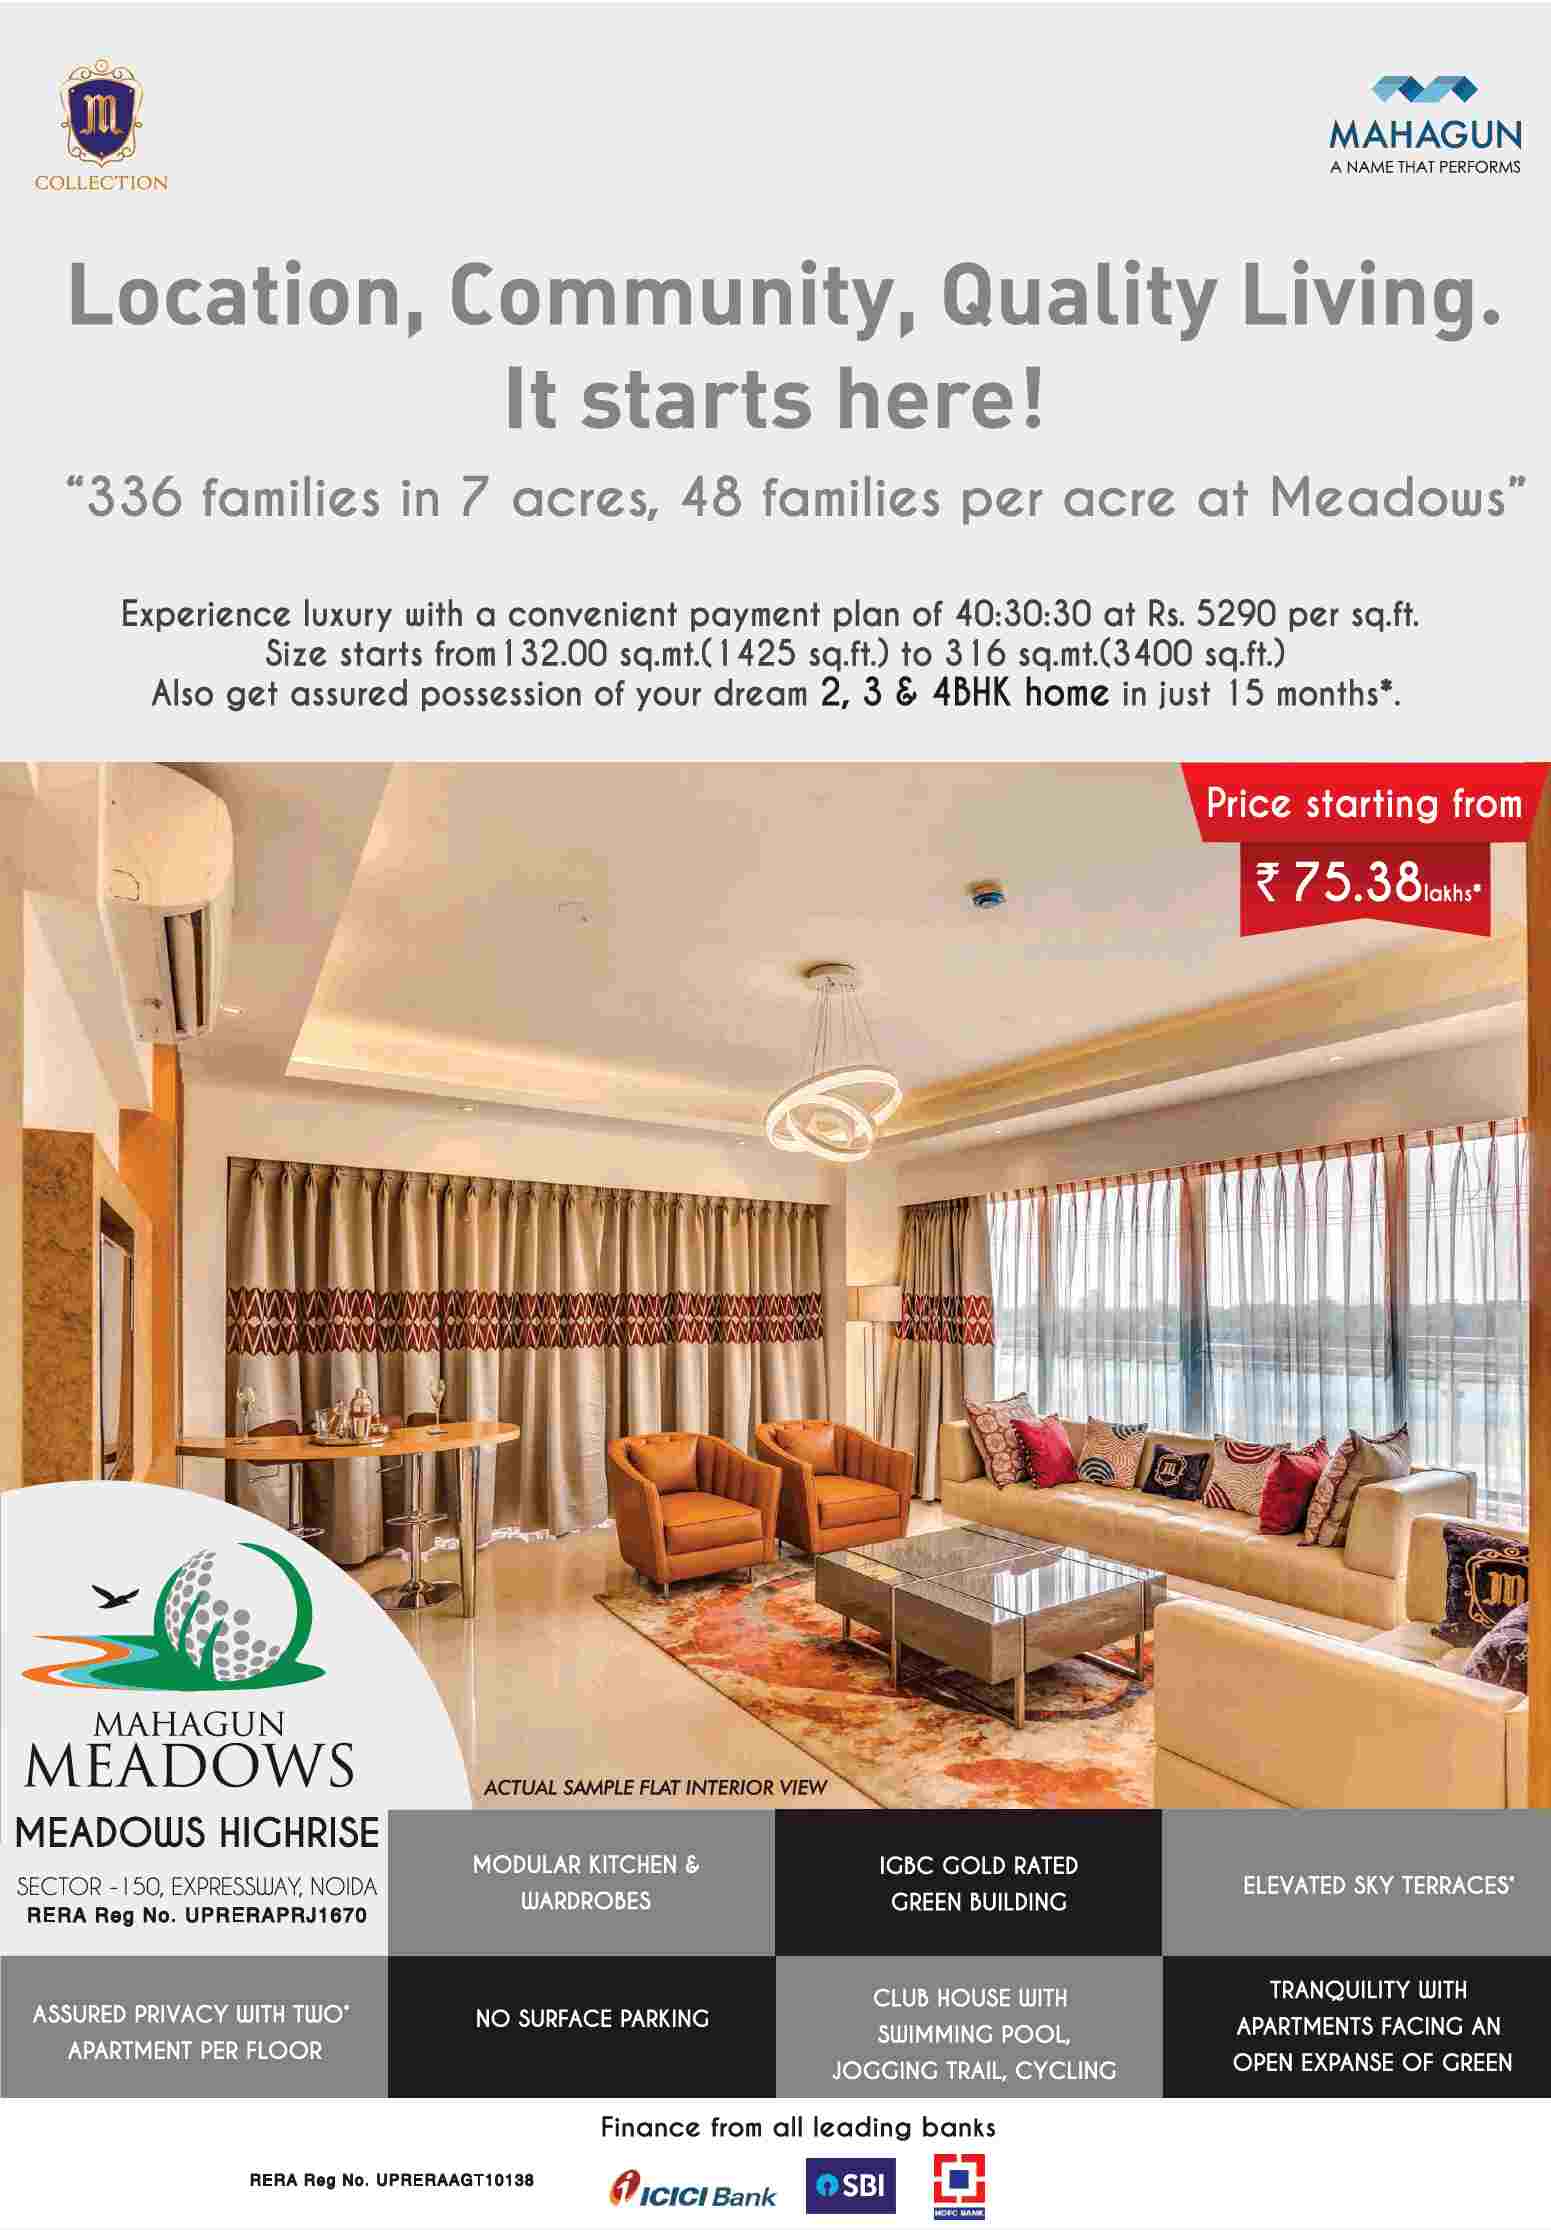 Experience luxury with a convenient payment plan of 40:30:30 at Mahagun Meadows in Noida Update